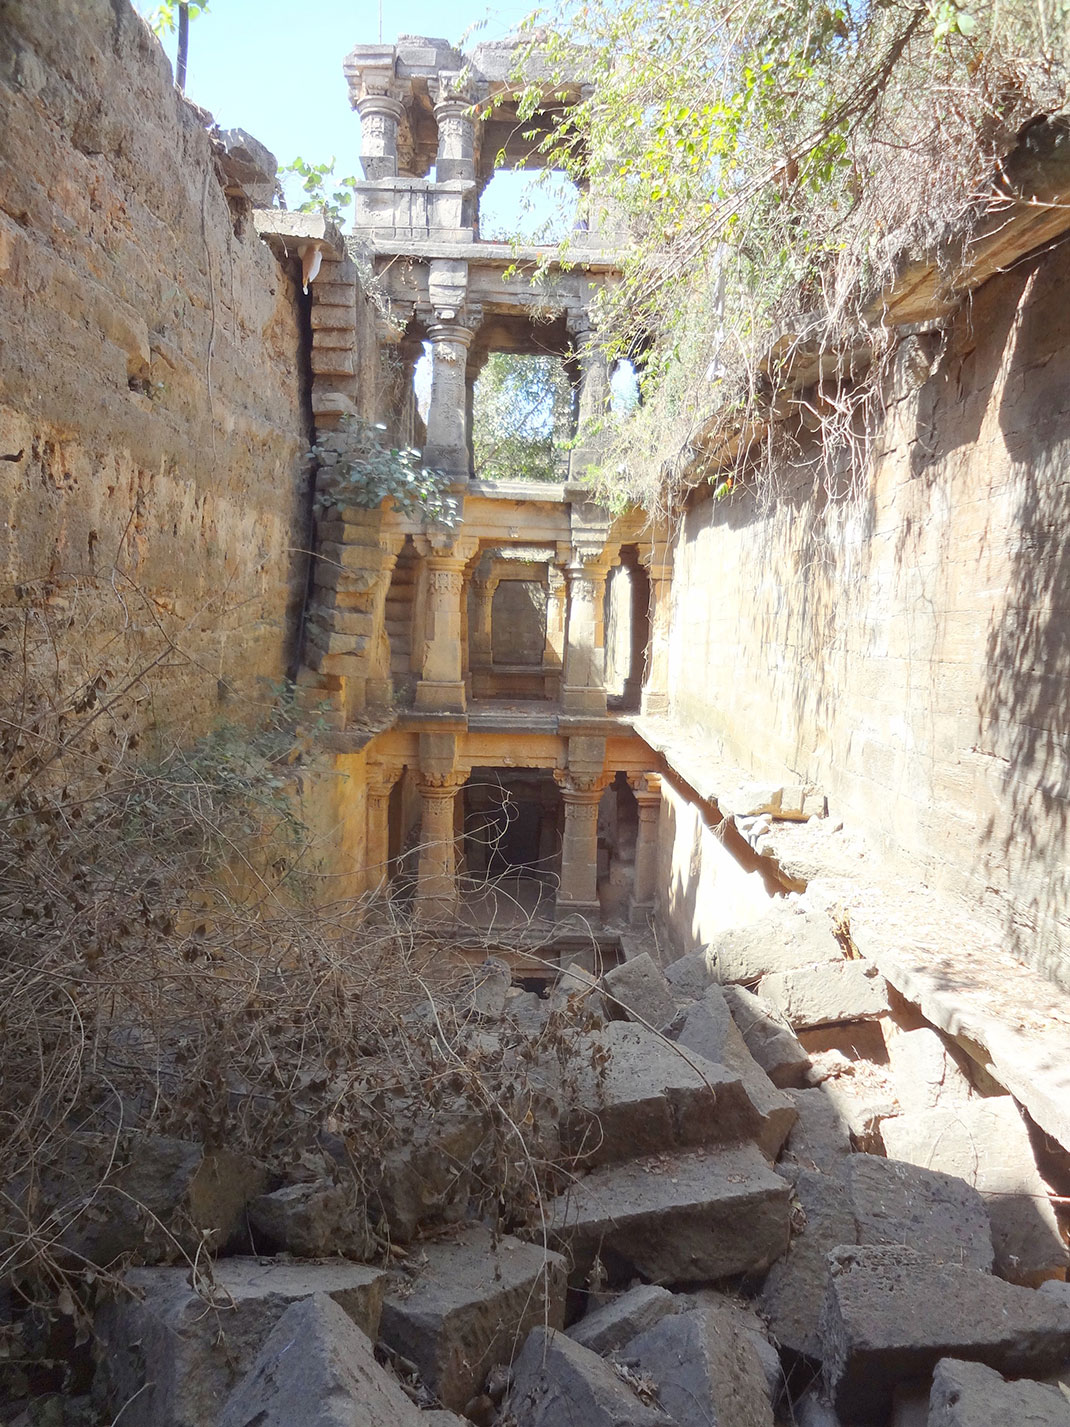 Admire These 2000 Year Old Somptous Buildings In India Destined To Disappear-28